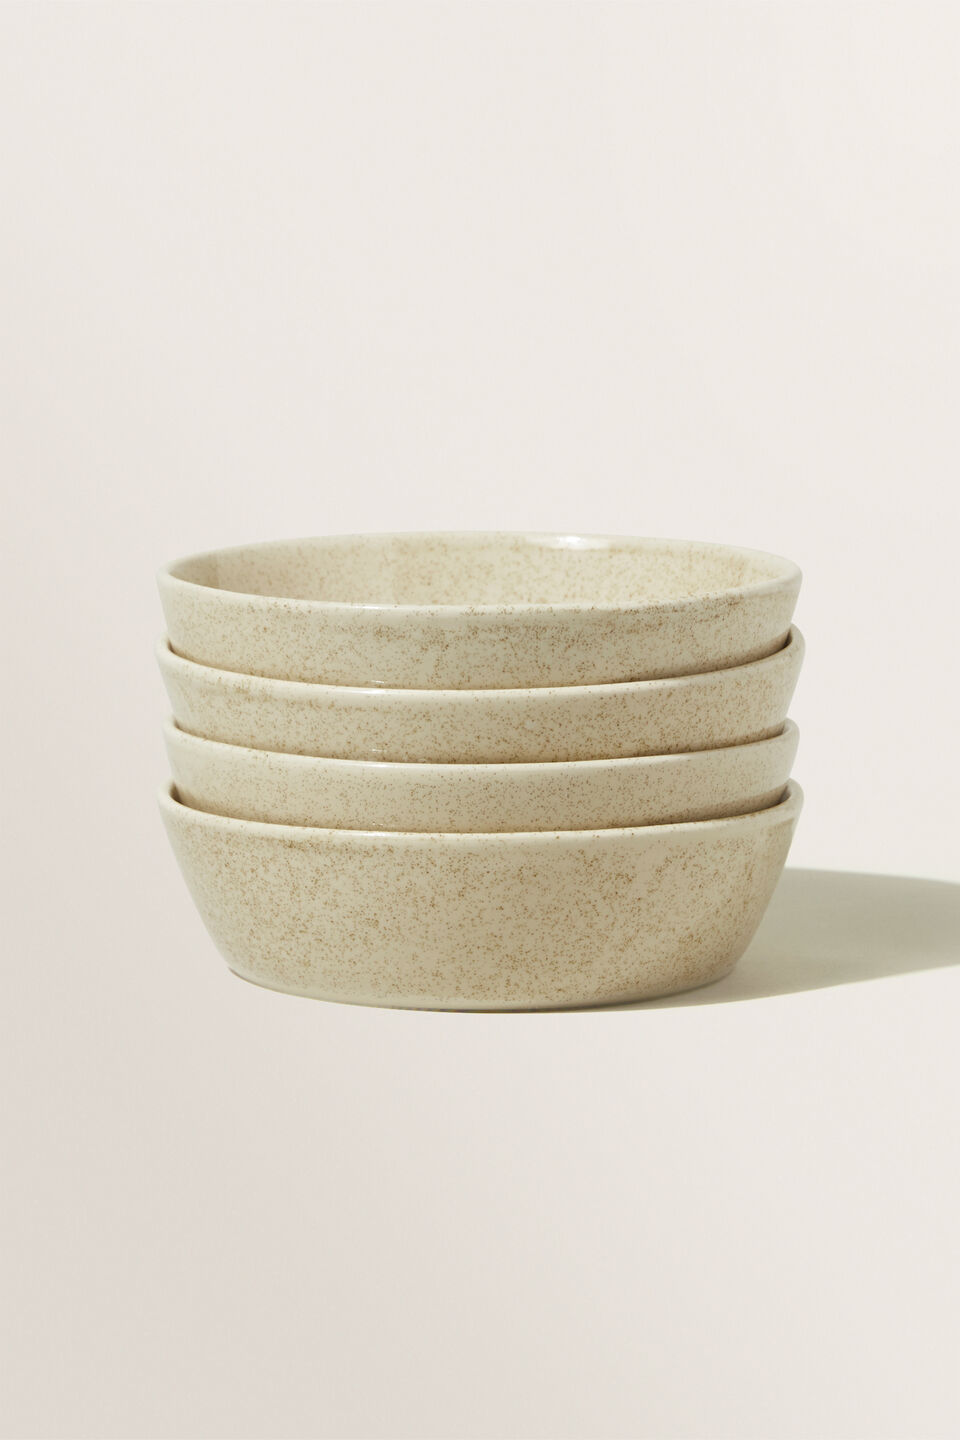 Tate Pasta Bowl  Oat Speckle